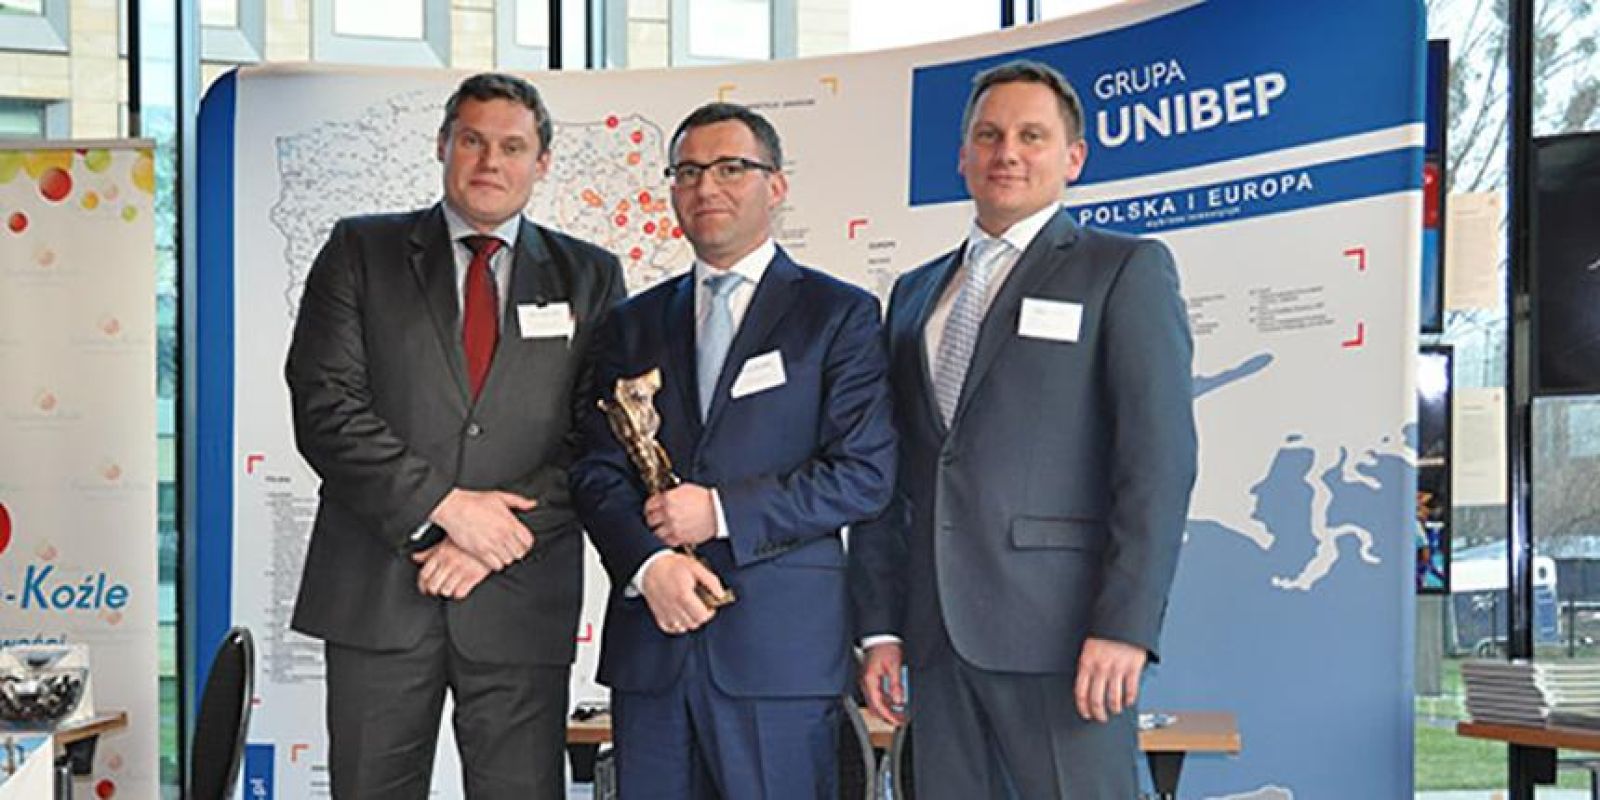 UNIBEP presented with the Polish Sports Constructor award